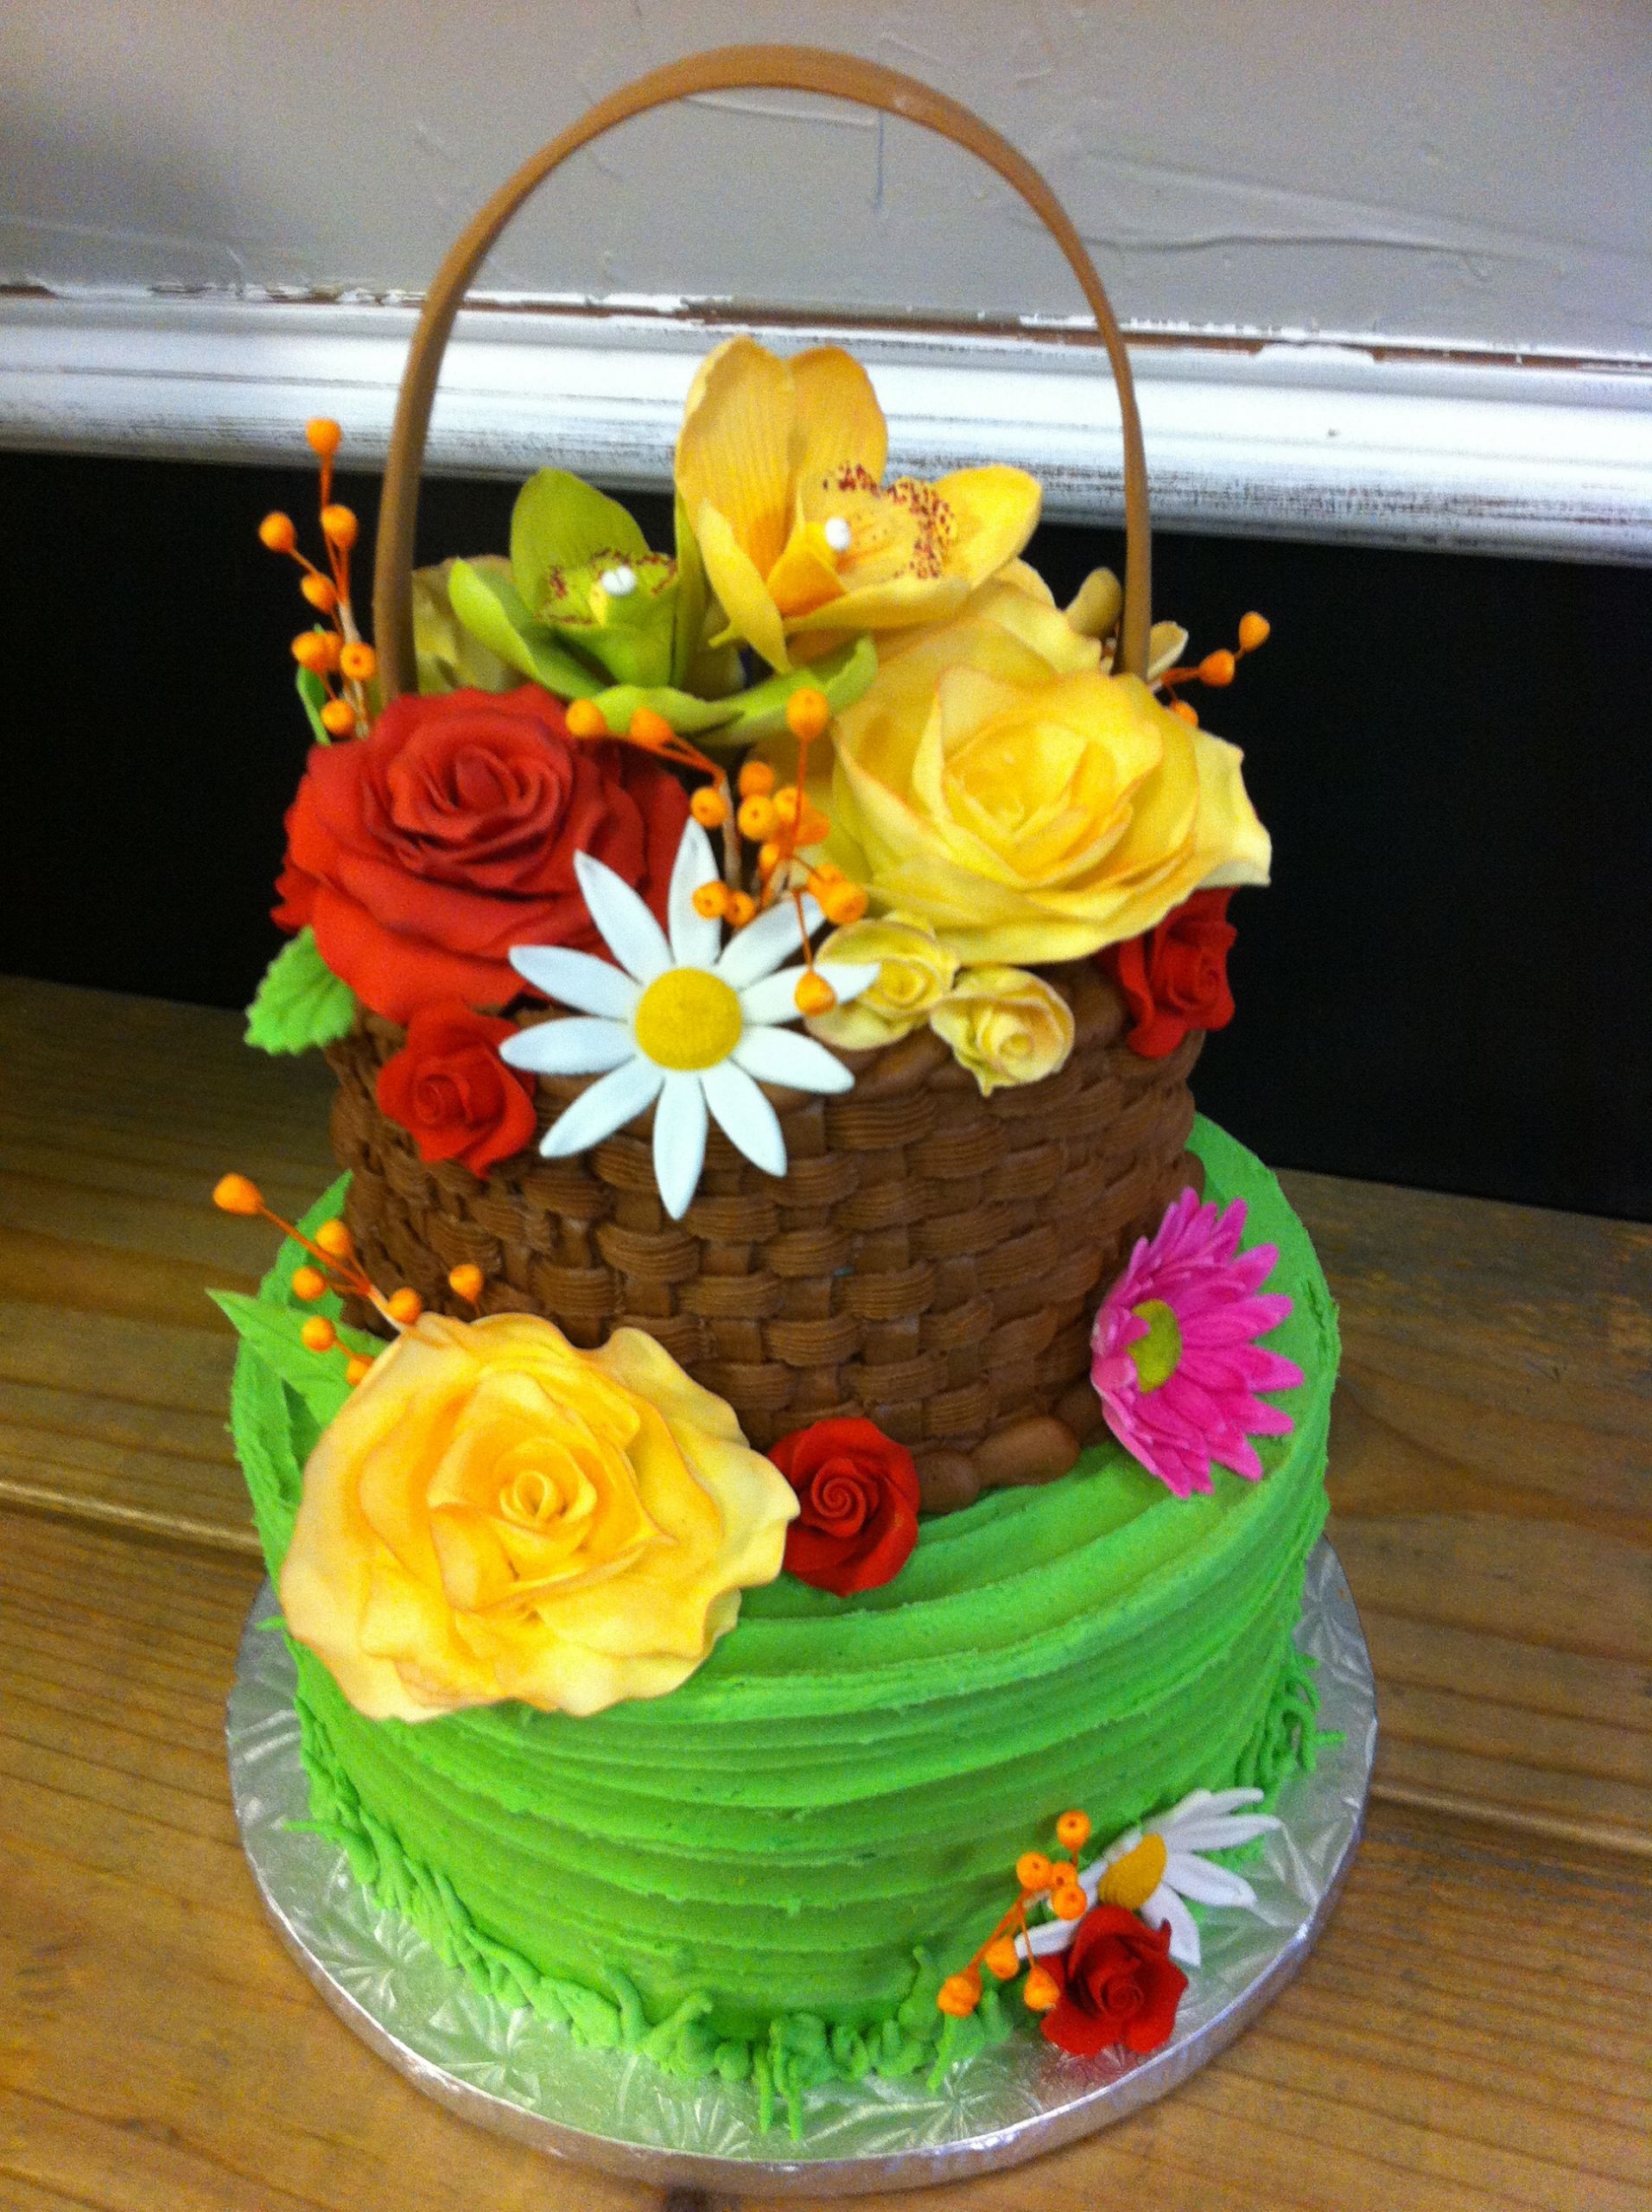 Happy Birthday Cake And Flowers
 Party cakes in McKinney and Dallas Texas